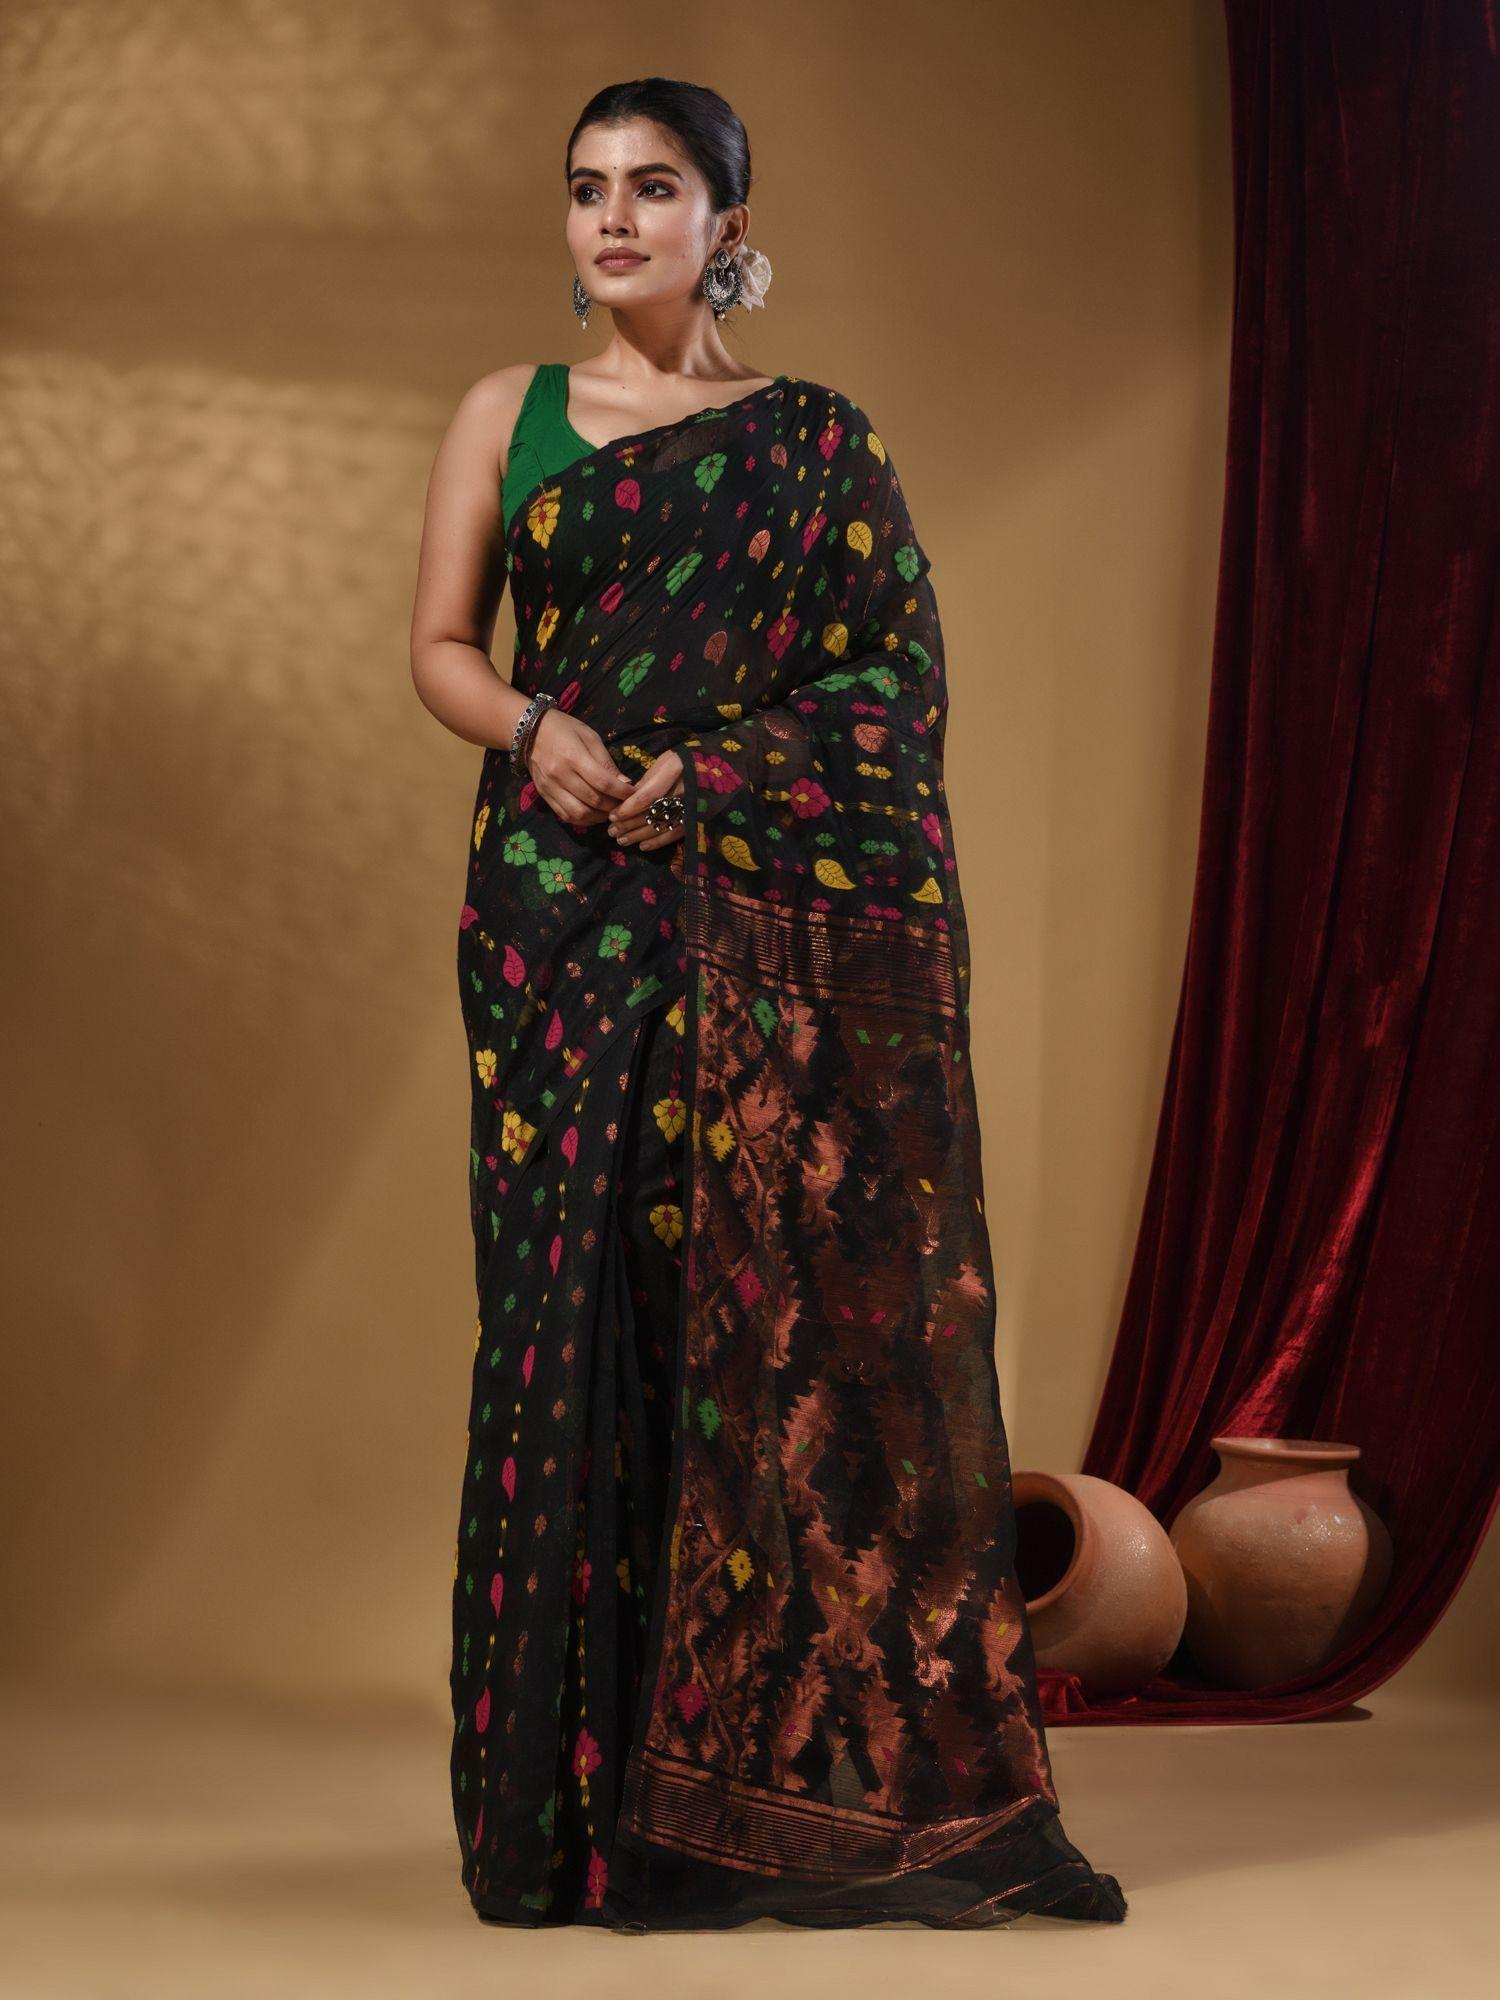 Black Cotton Handwoven jamdhani Saree with Multicolor Woven Designs and Motifs